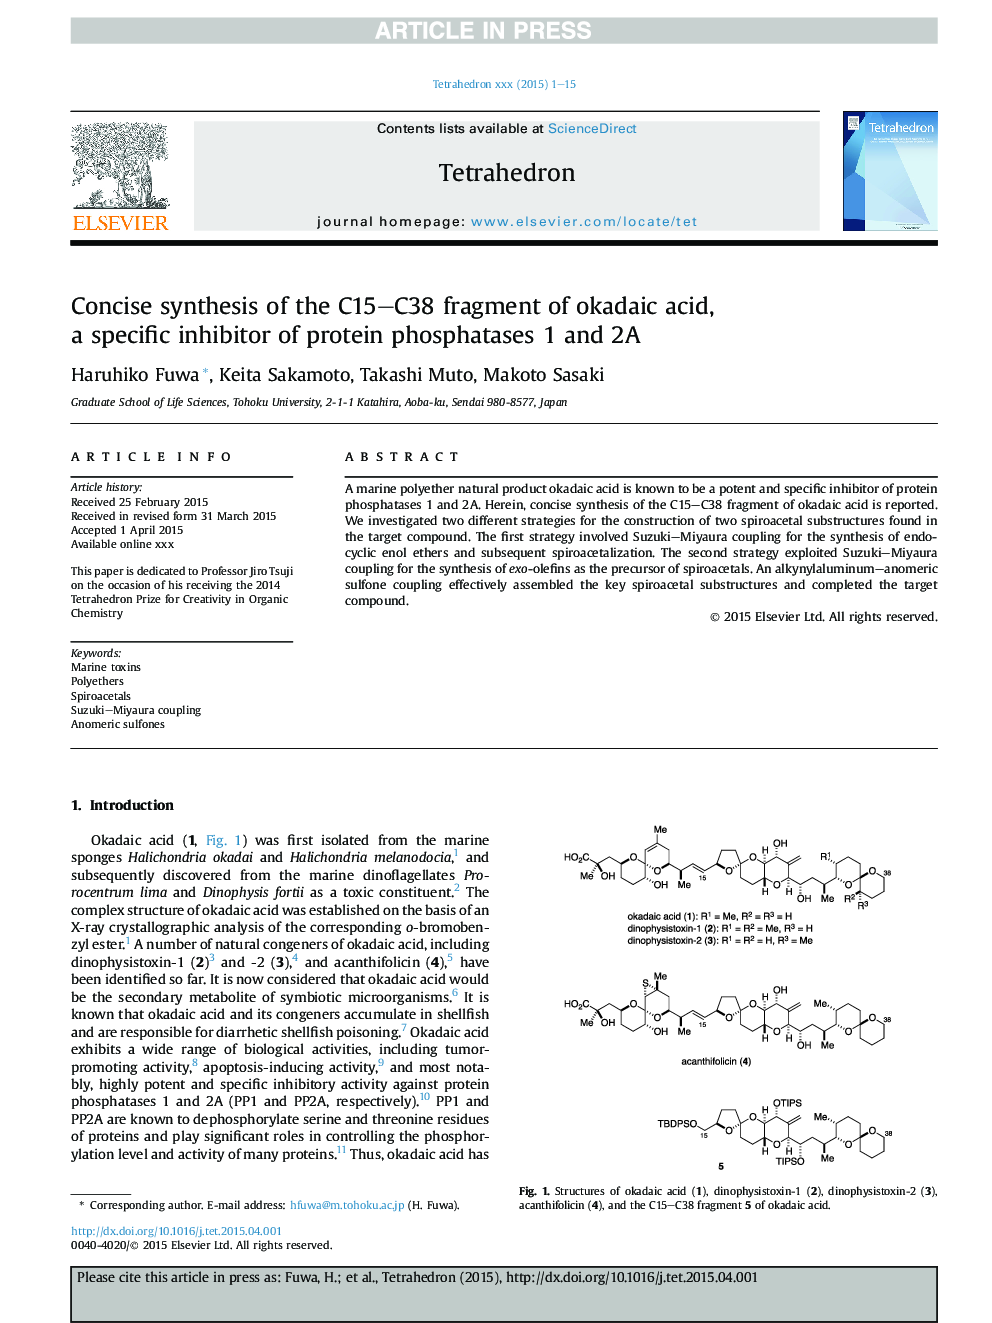 Concise synthesis of the C15-C38 fragment of okadaic acid, a specific inhibitor of protein phosphatases 1 and 2A